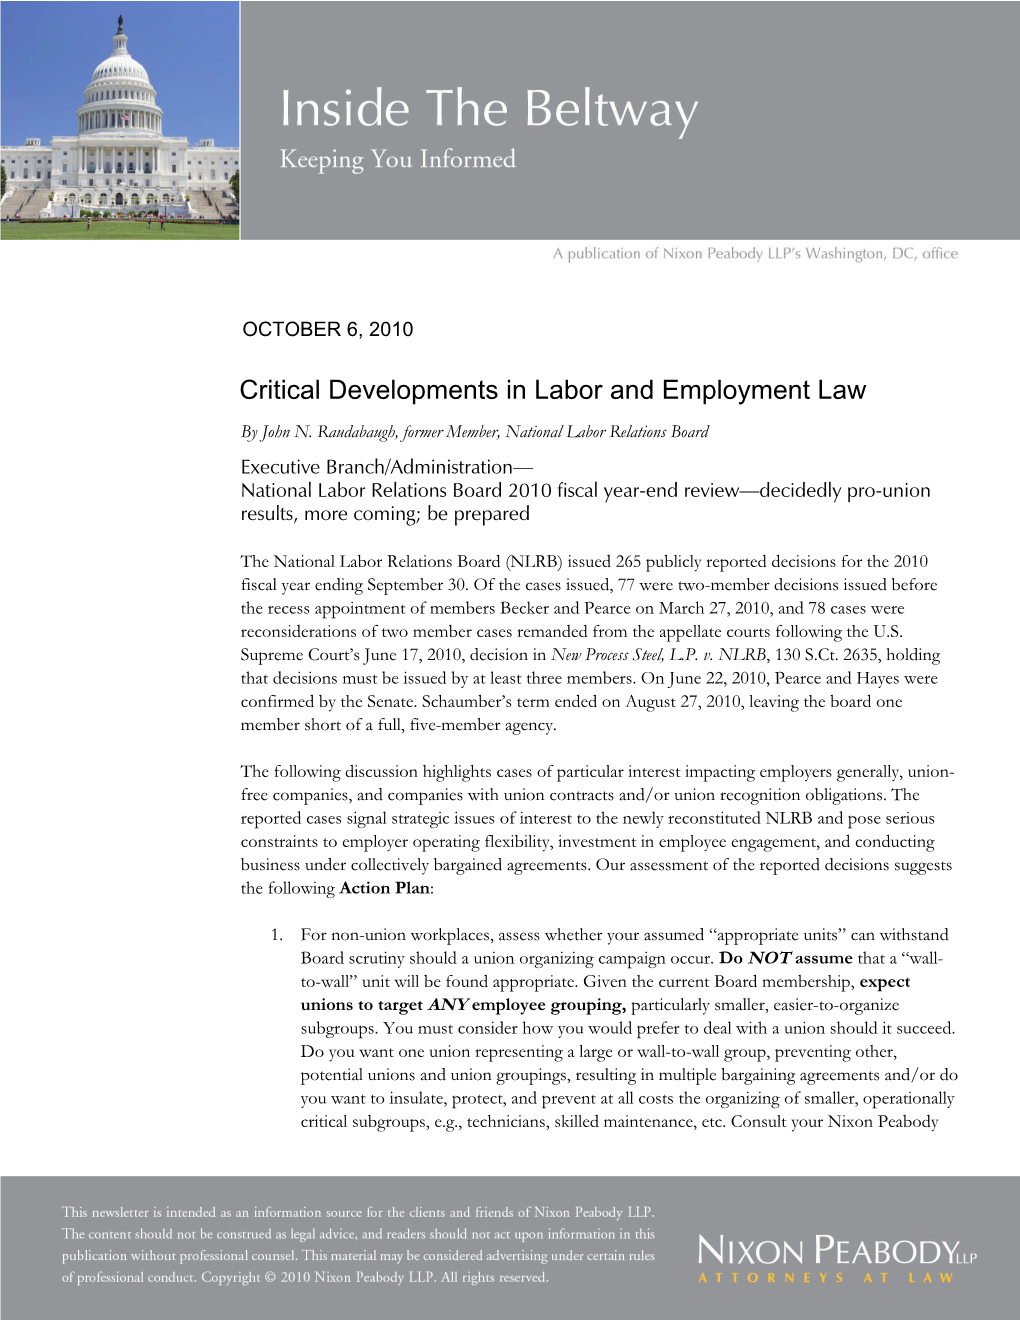 Critical Developments in Labor and Employment Law by John N